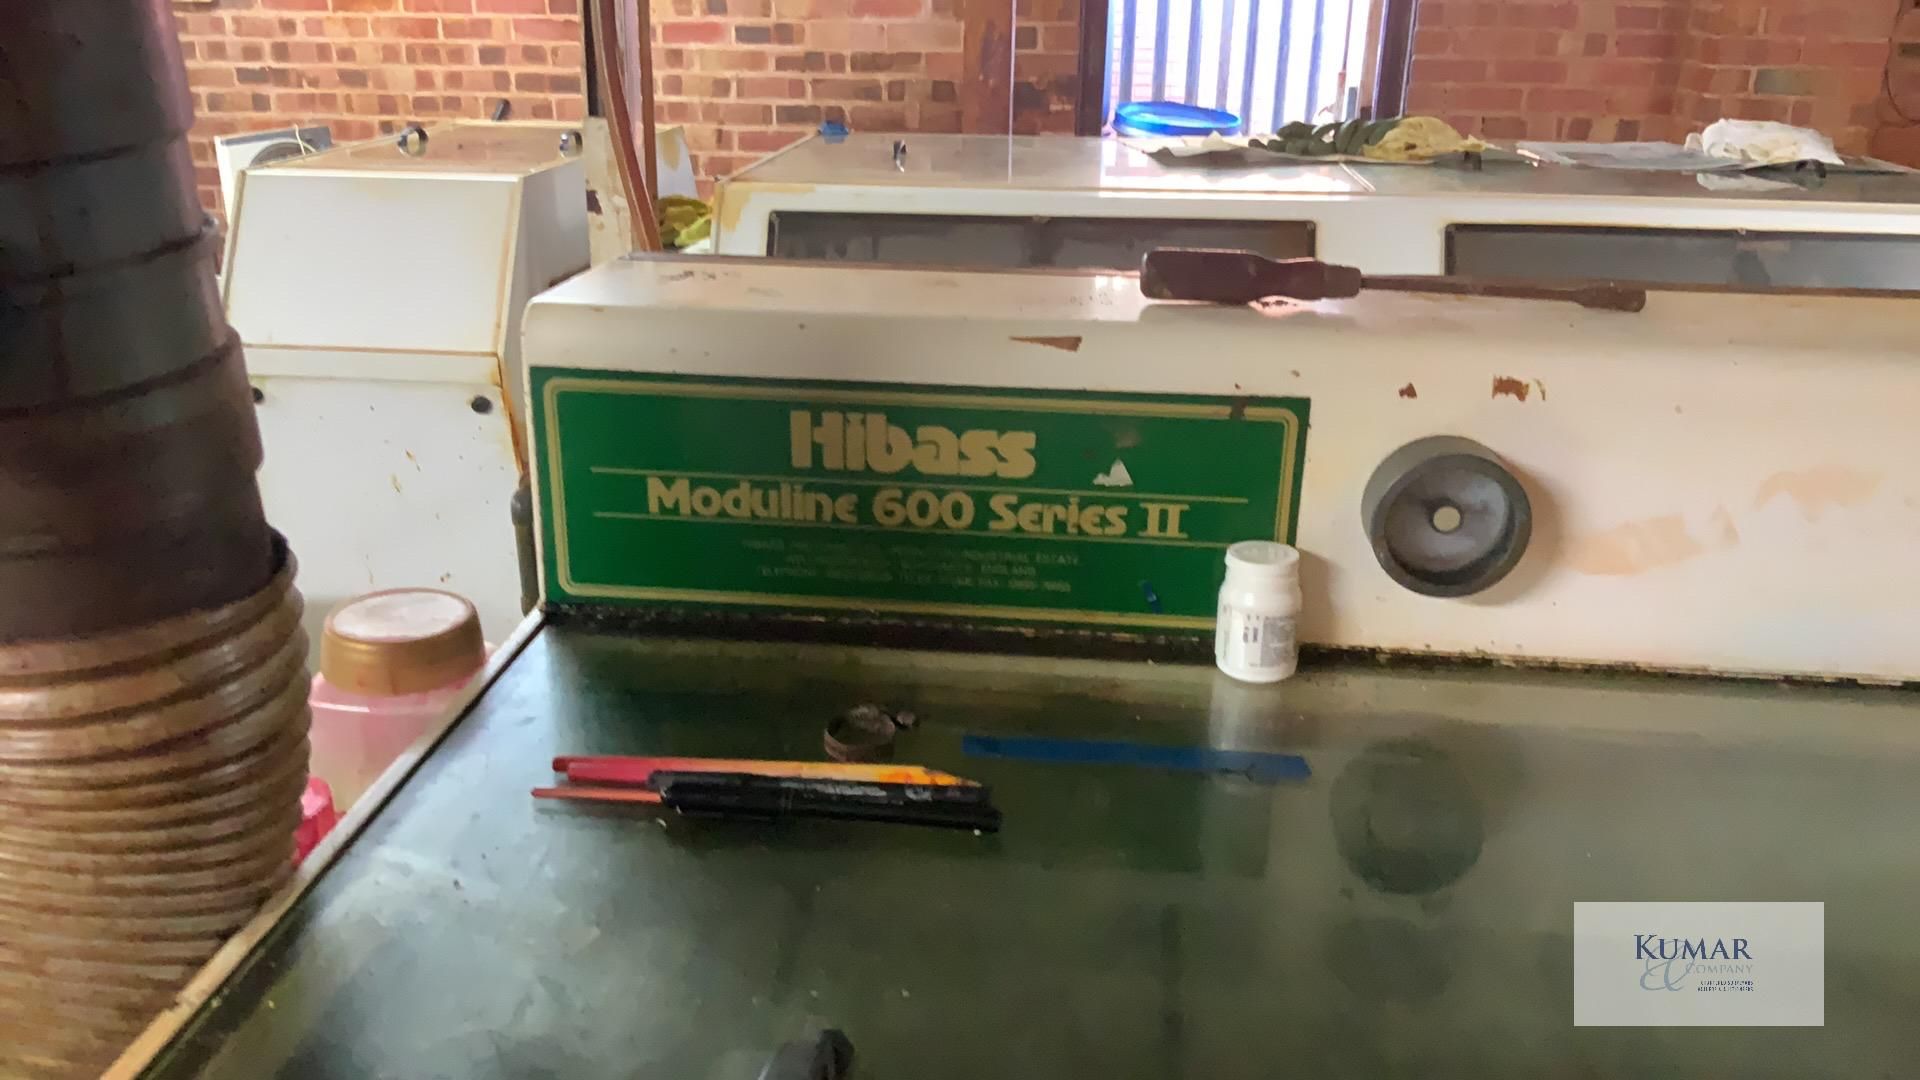 Hi Bass Moduline Series II 600 Developer - Please Note This Item Will Require Decommissioning and - Image 3 of 6